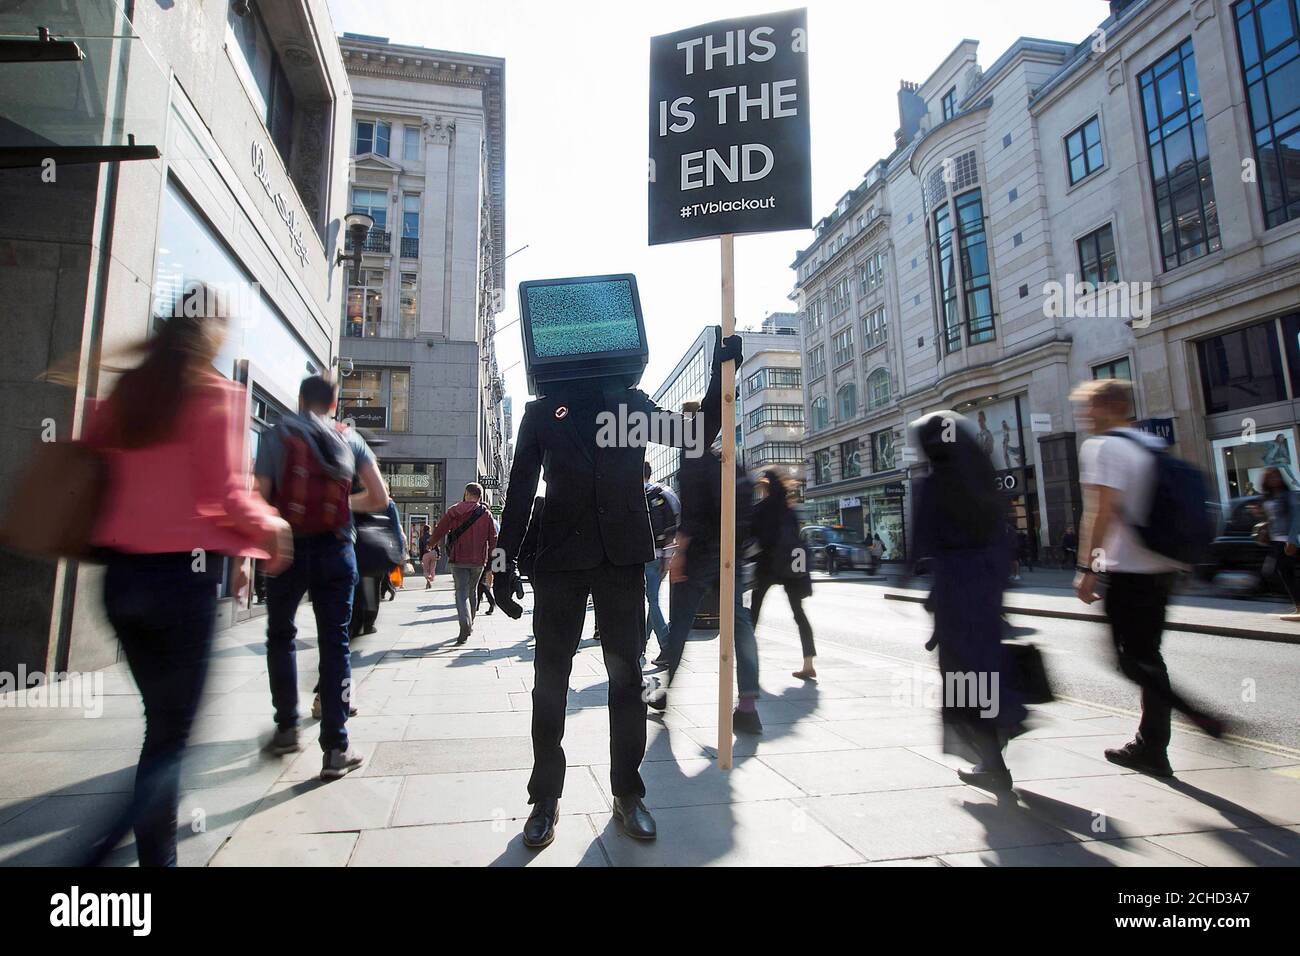 A person with a TV head holds a 'This is the End' protest sign in Oxford Circus, London, as part of a campaign by Samsung to launch their new QLED TV range. Stock Photo